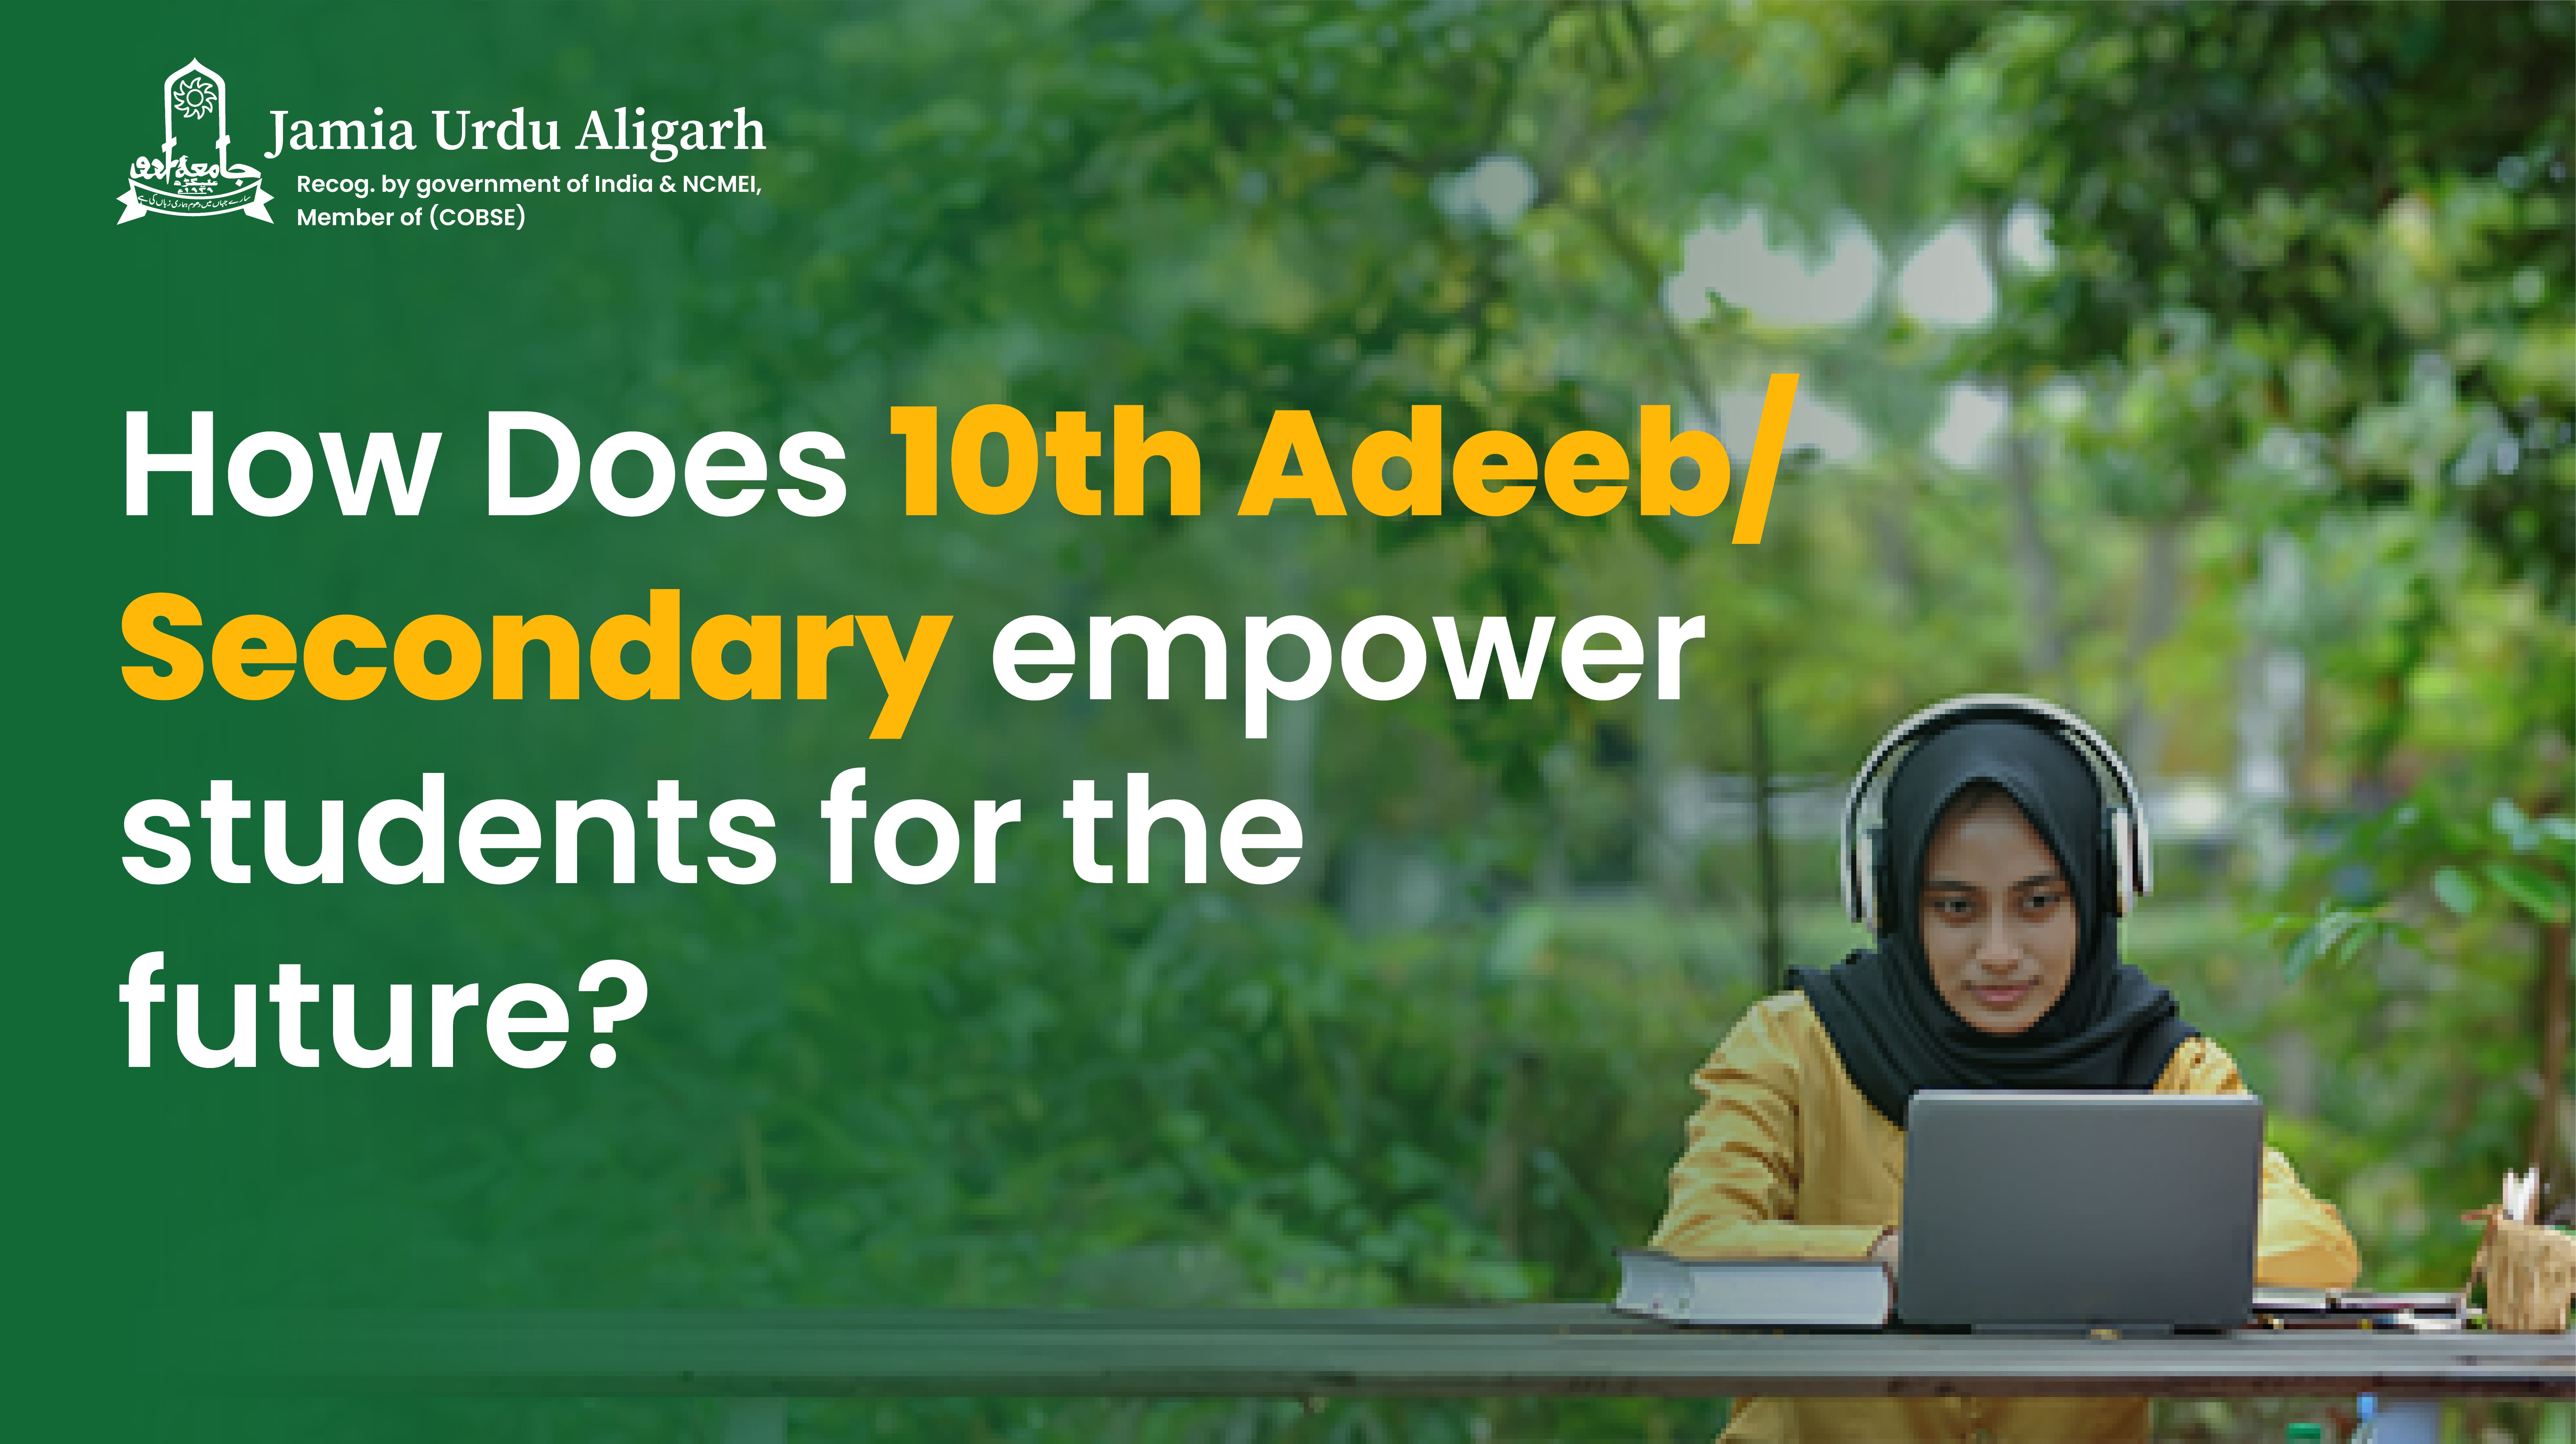 How Does 10th Adeeb/Secondary empower students for the future?